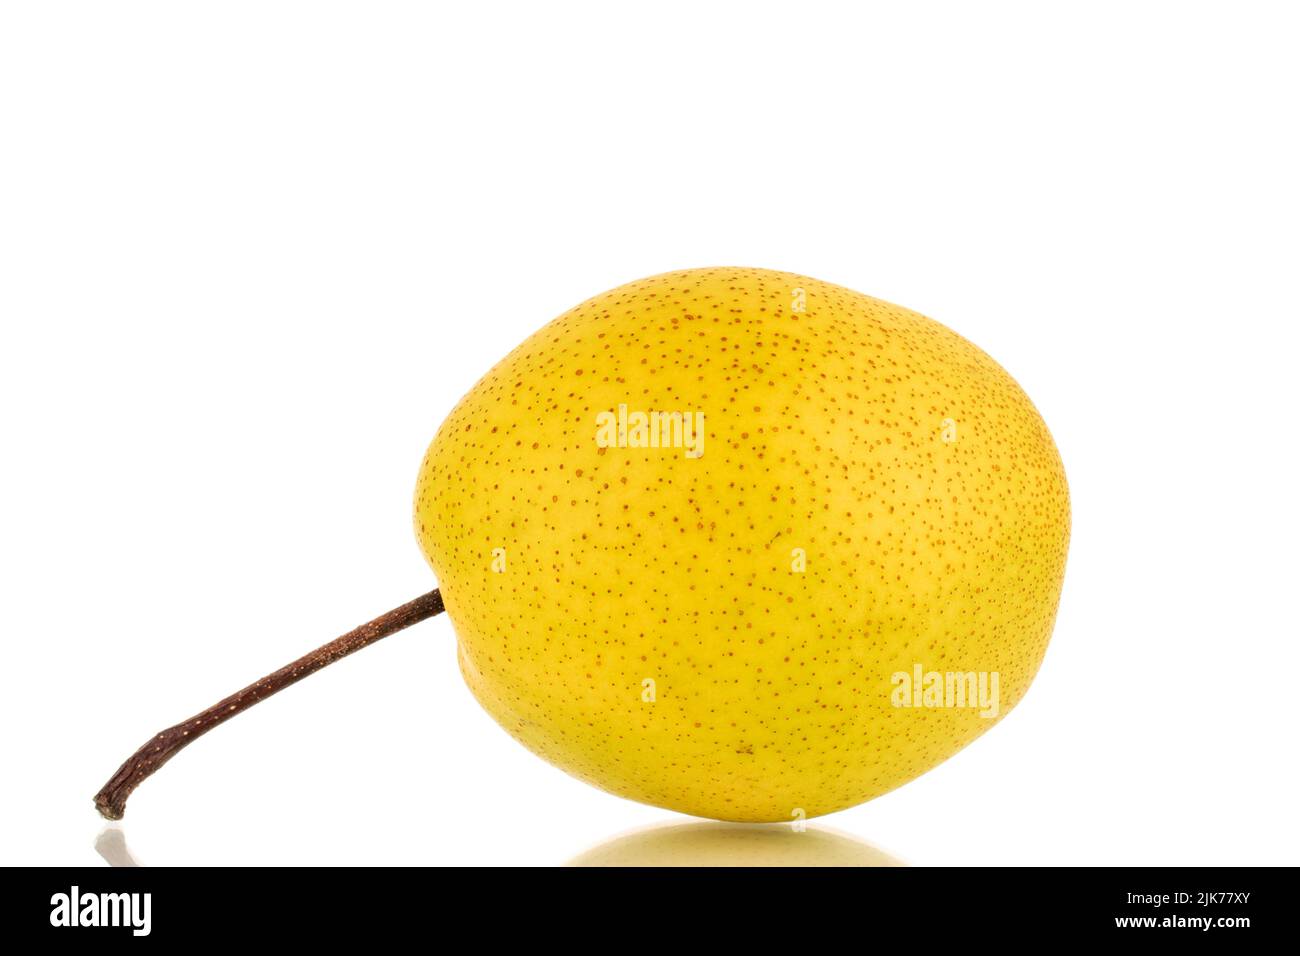 One organic bright yellow pear, close-up, isolated on white background. Stock Photo